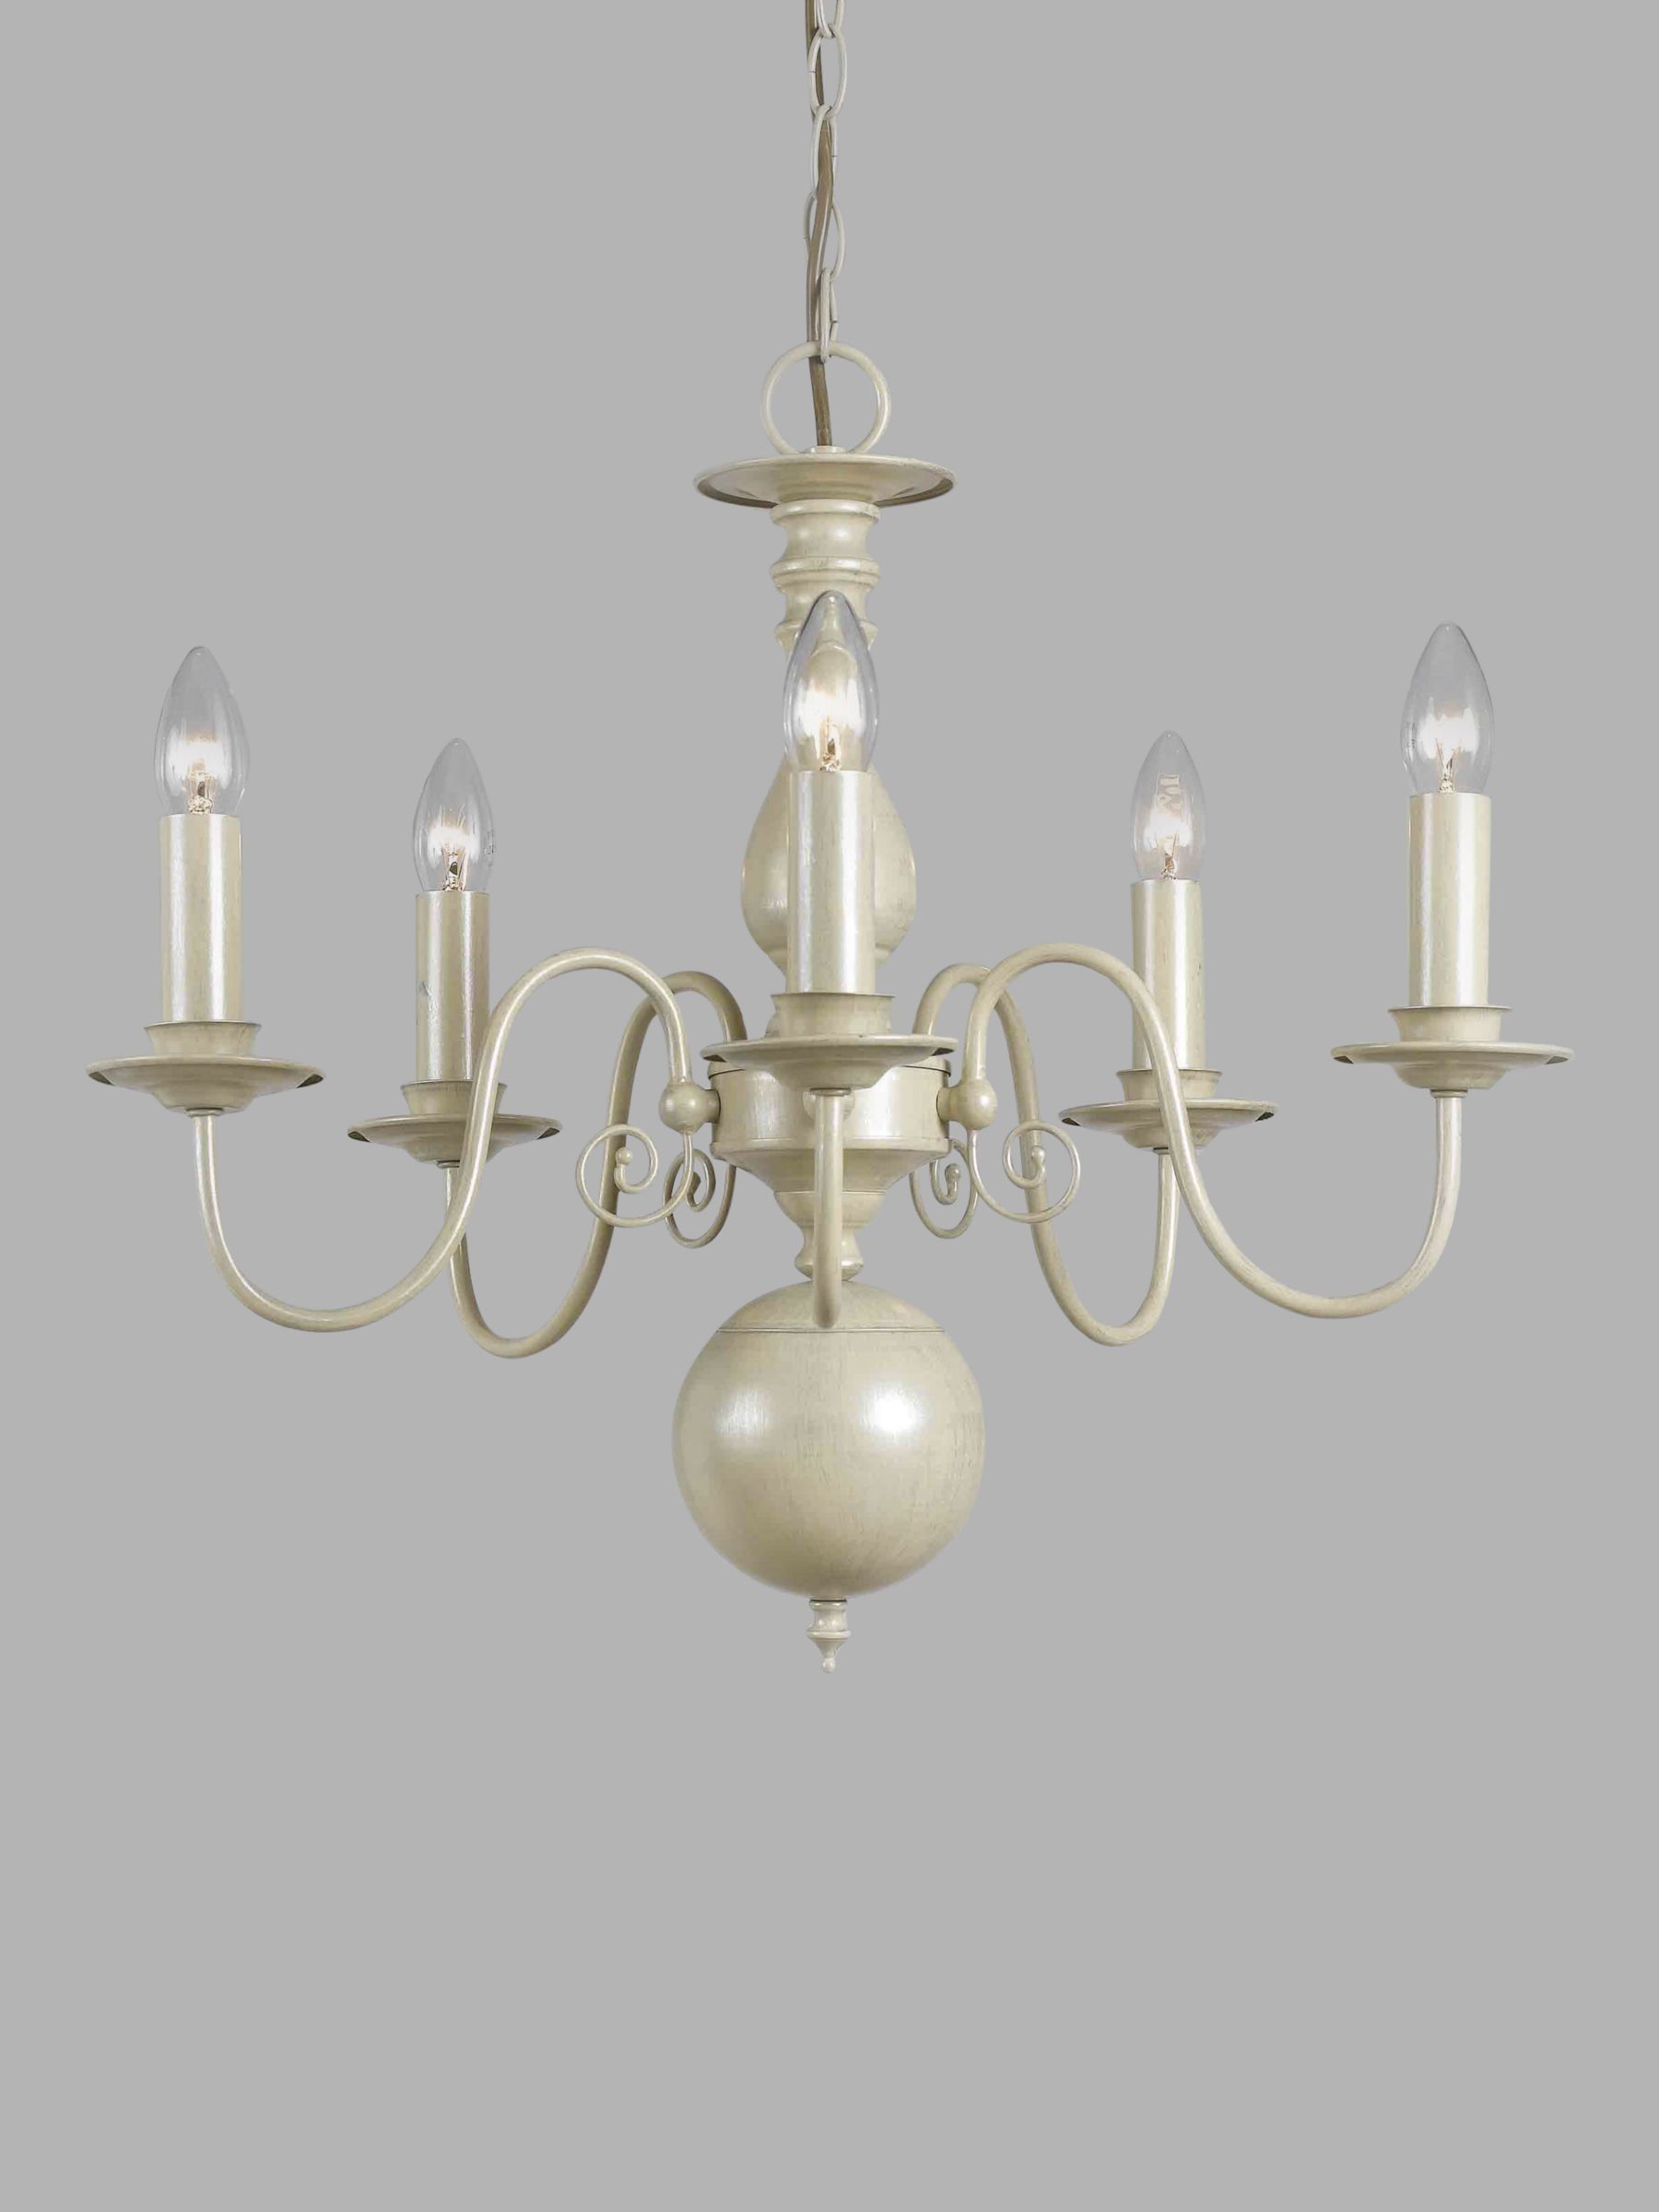 Photo of Impex bologna 5 arm chandelier ceiling light